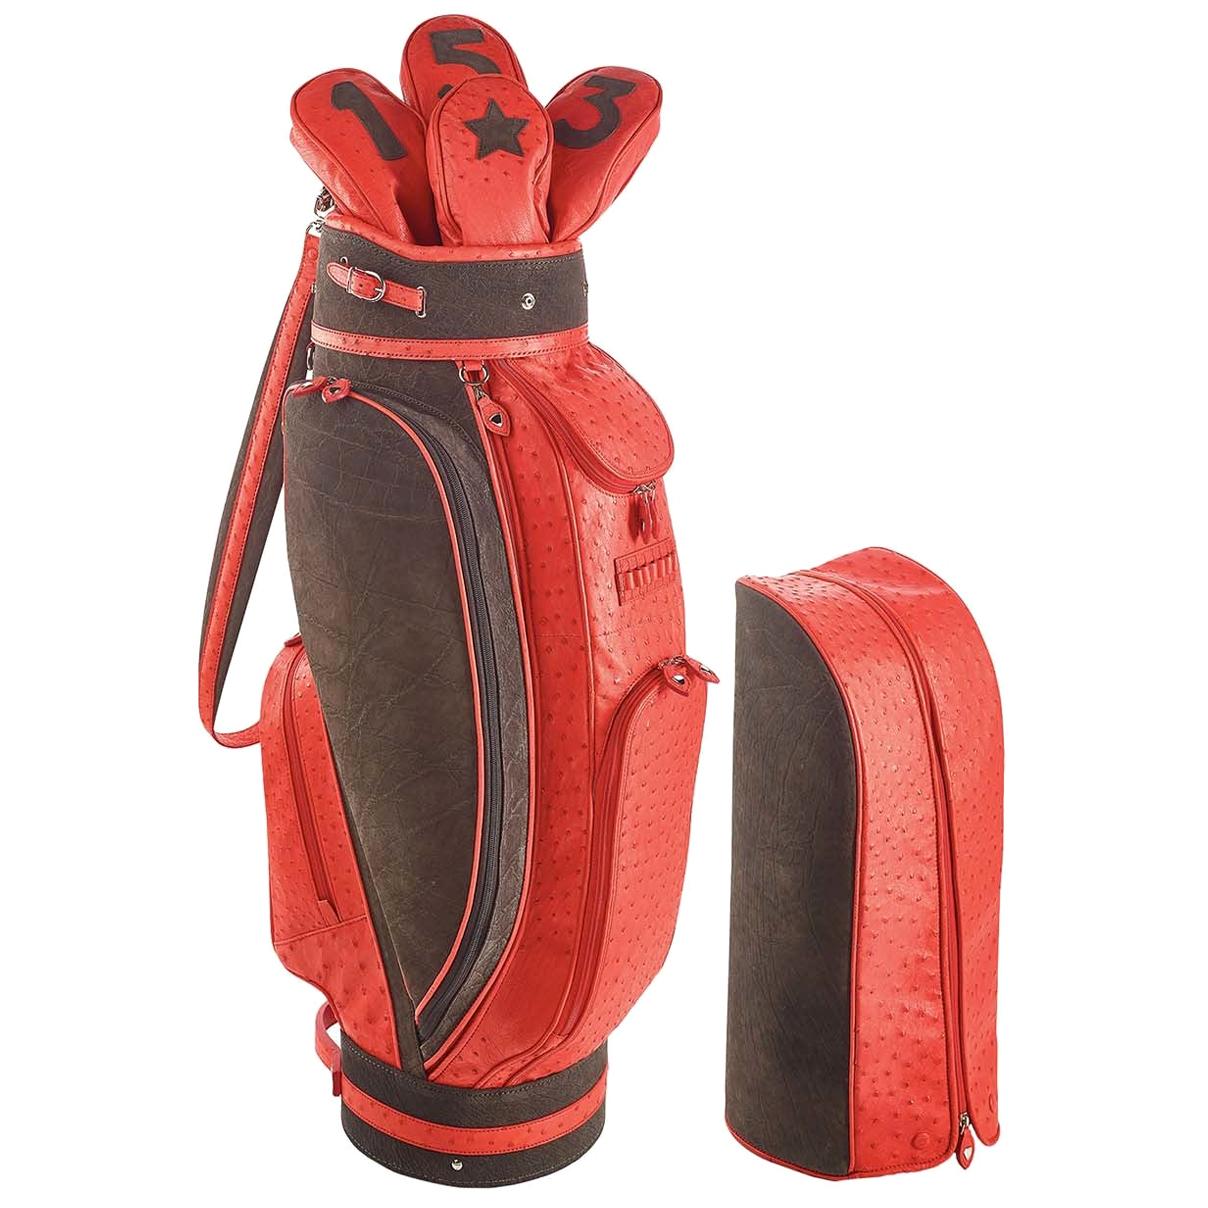 Royal Red Golf Bag by Barchi